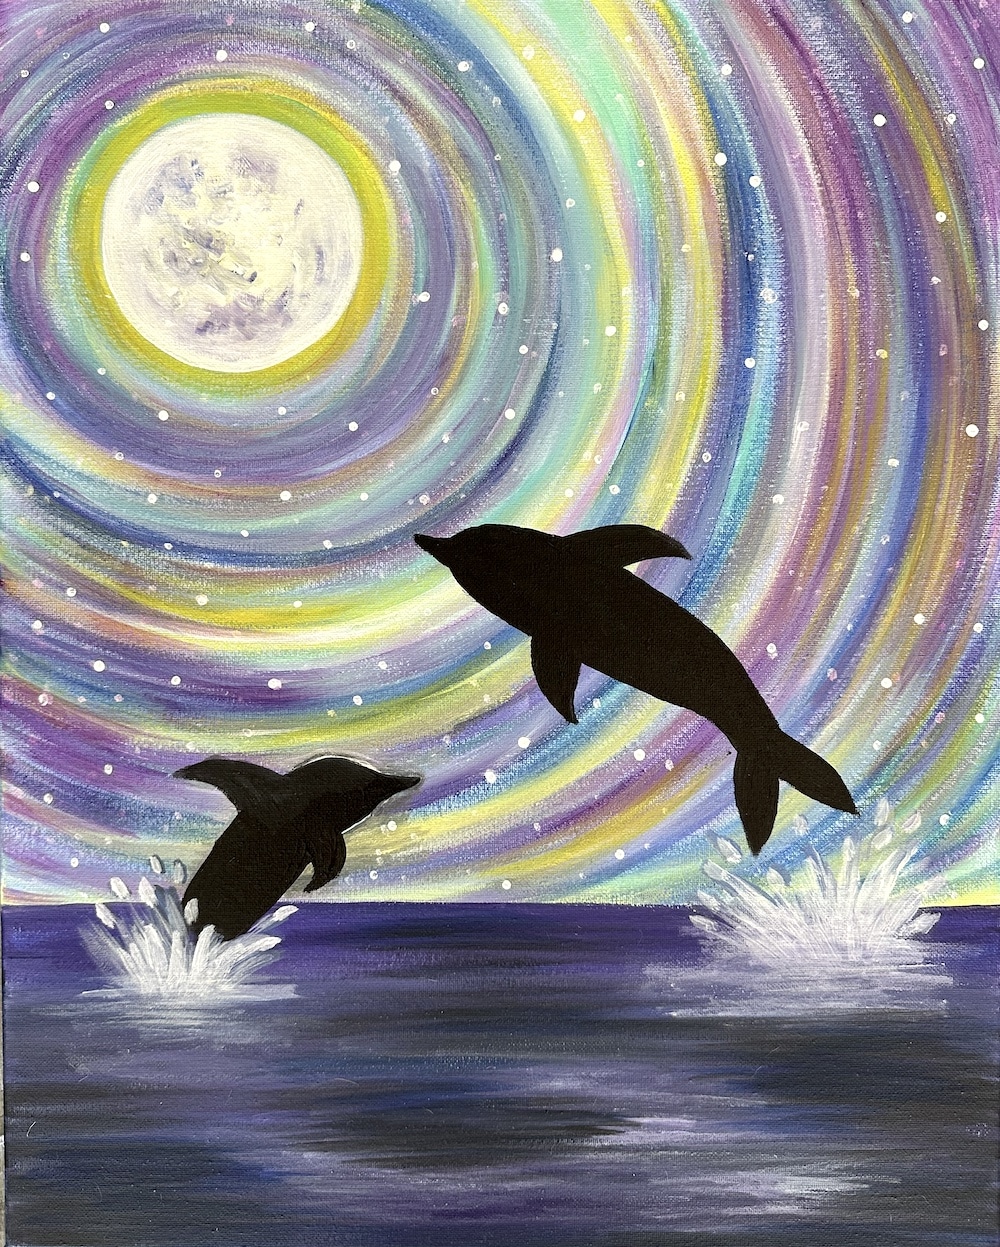 Fun Painting Class Ft Myers Beach - Playful Dolphins